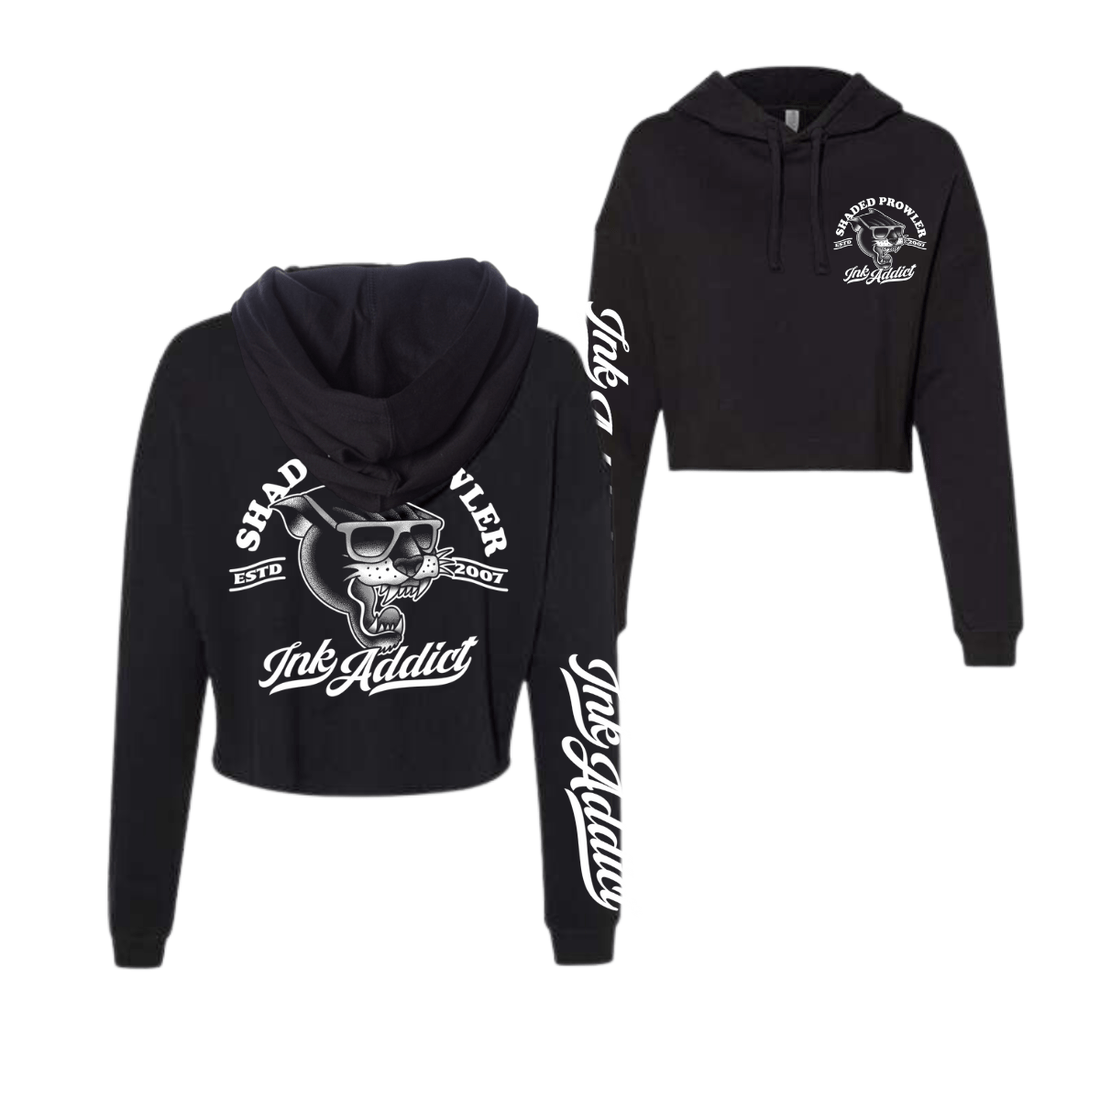 Shaded Prowler Cropped Hoodie